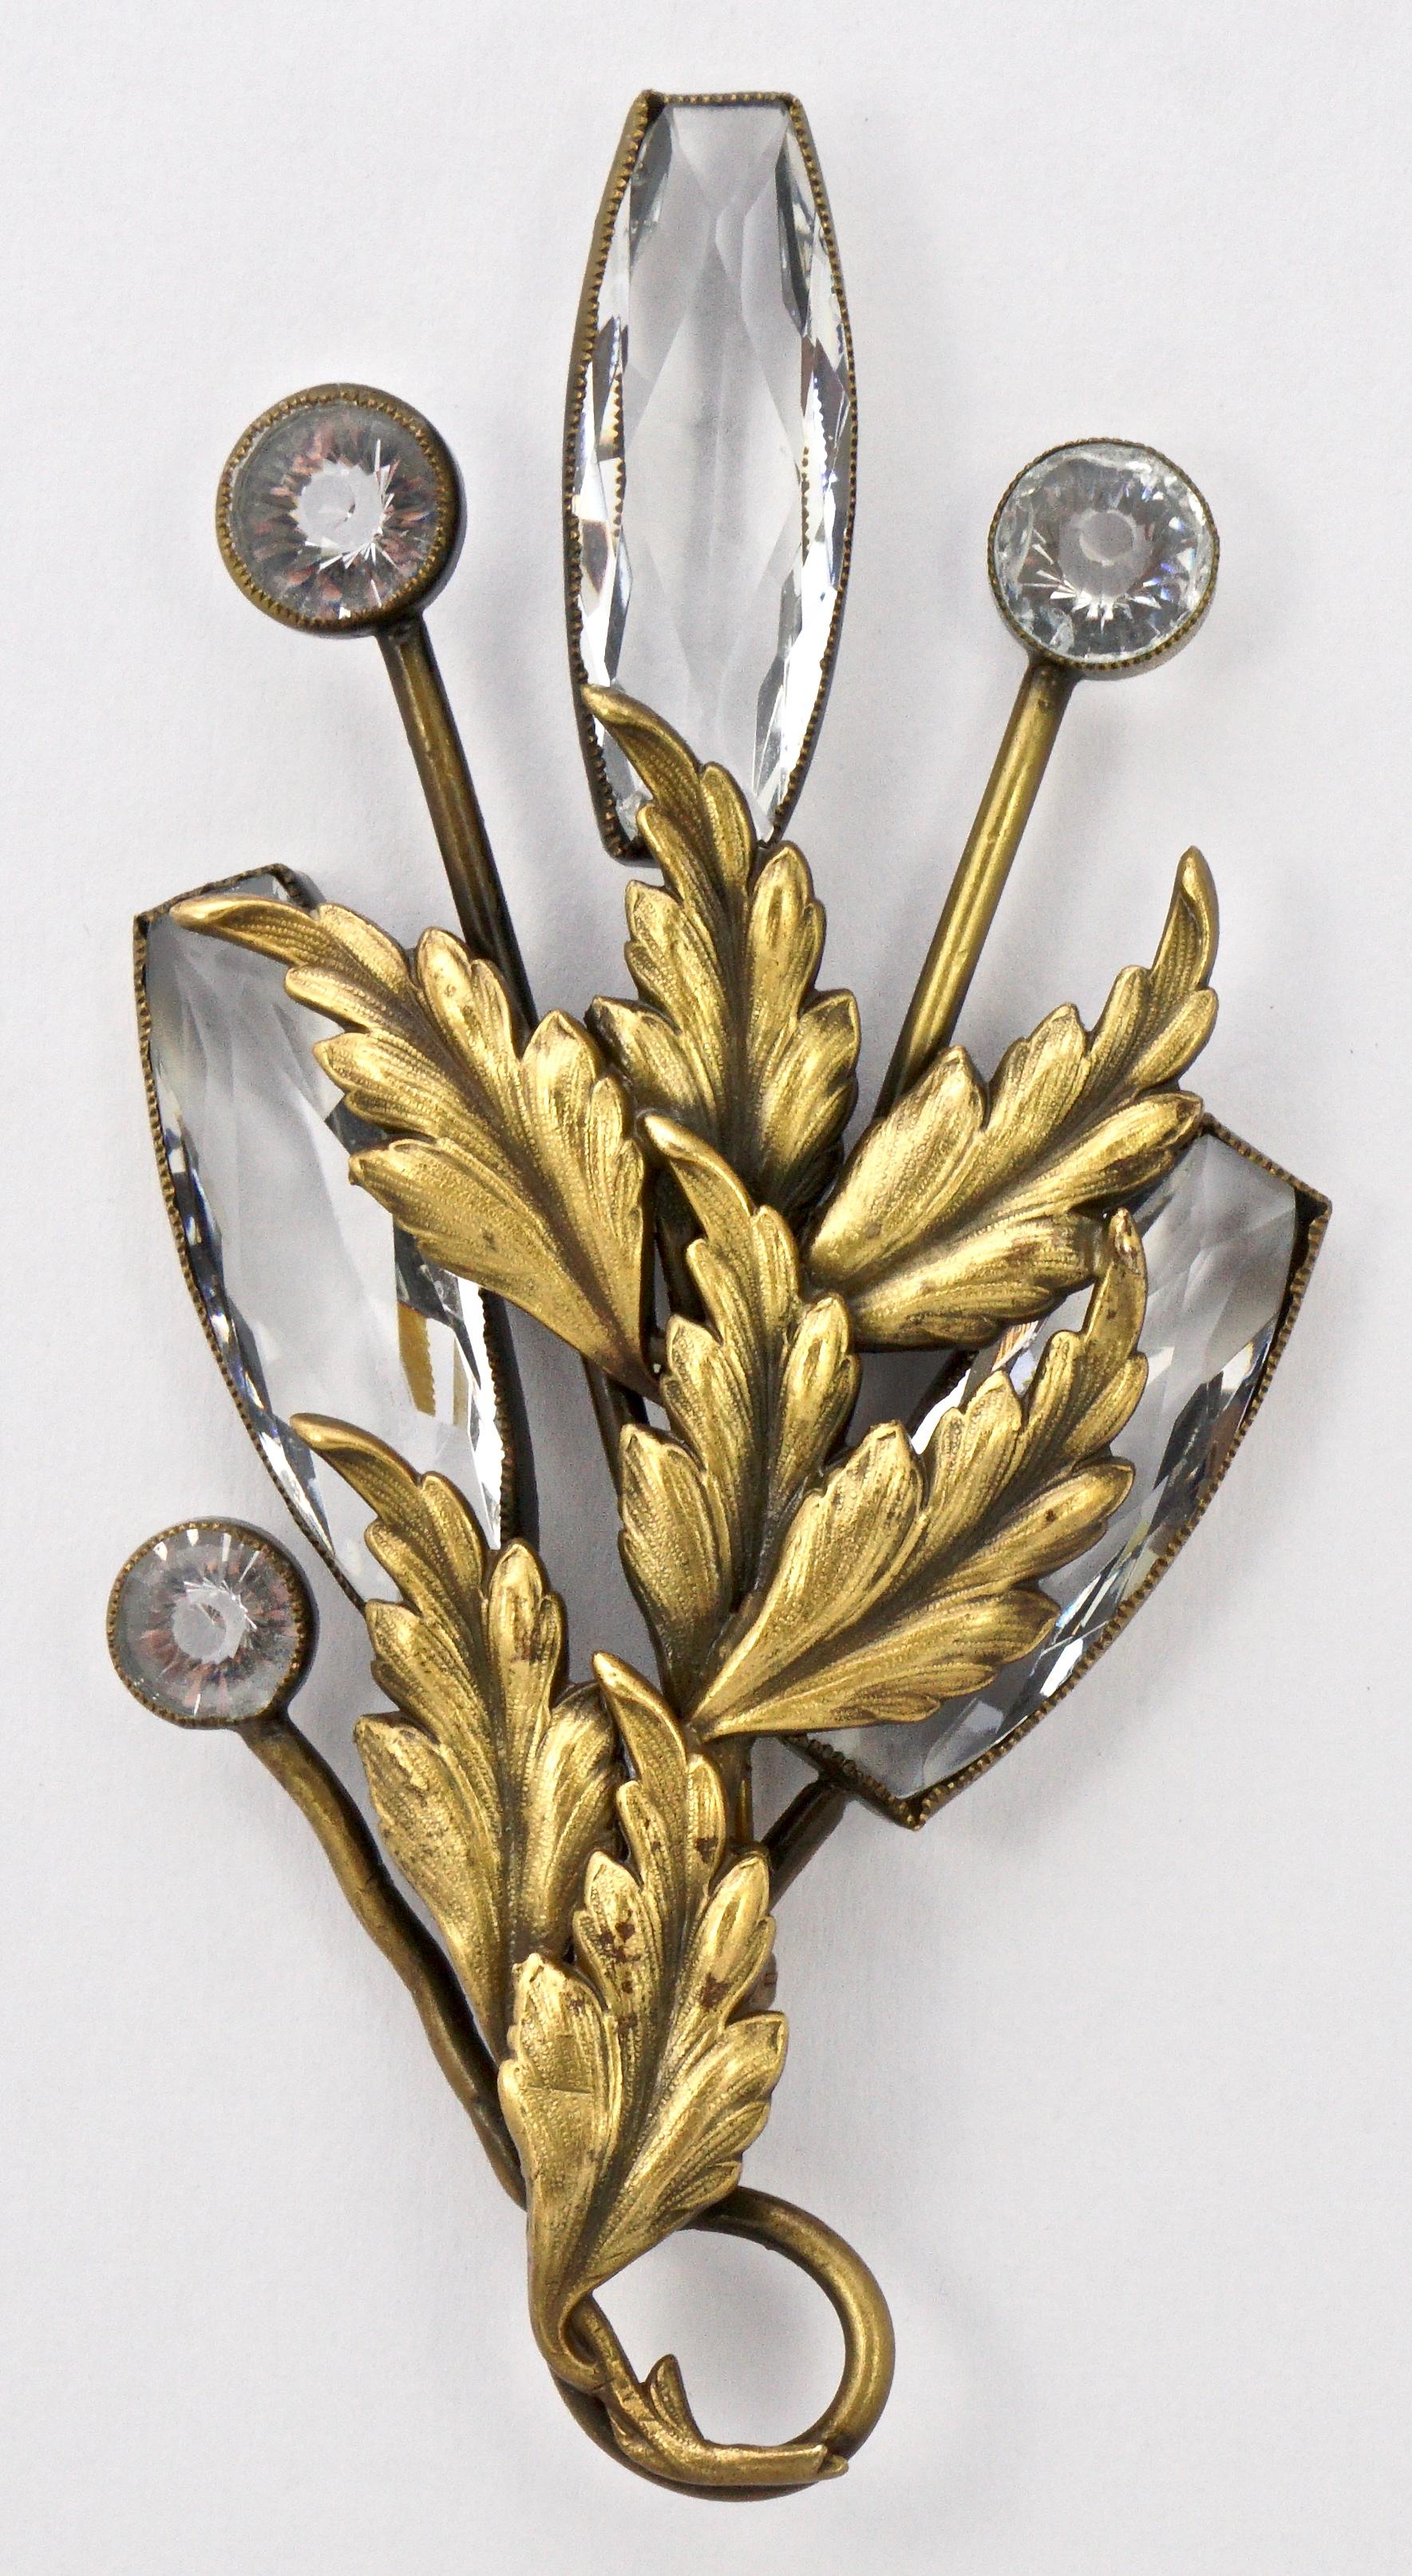 Joseff of Hollywood large brooch and clip-on earrings set. Featuring leaves with the Joseff Russian gold plated antique finish, and brilliant clear crystals. The brooch measures 12cm / 4.7 inches by 6.5cm / 2.5 inches, and the earrings are length